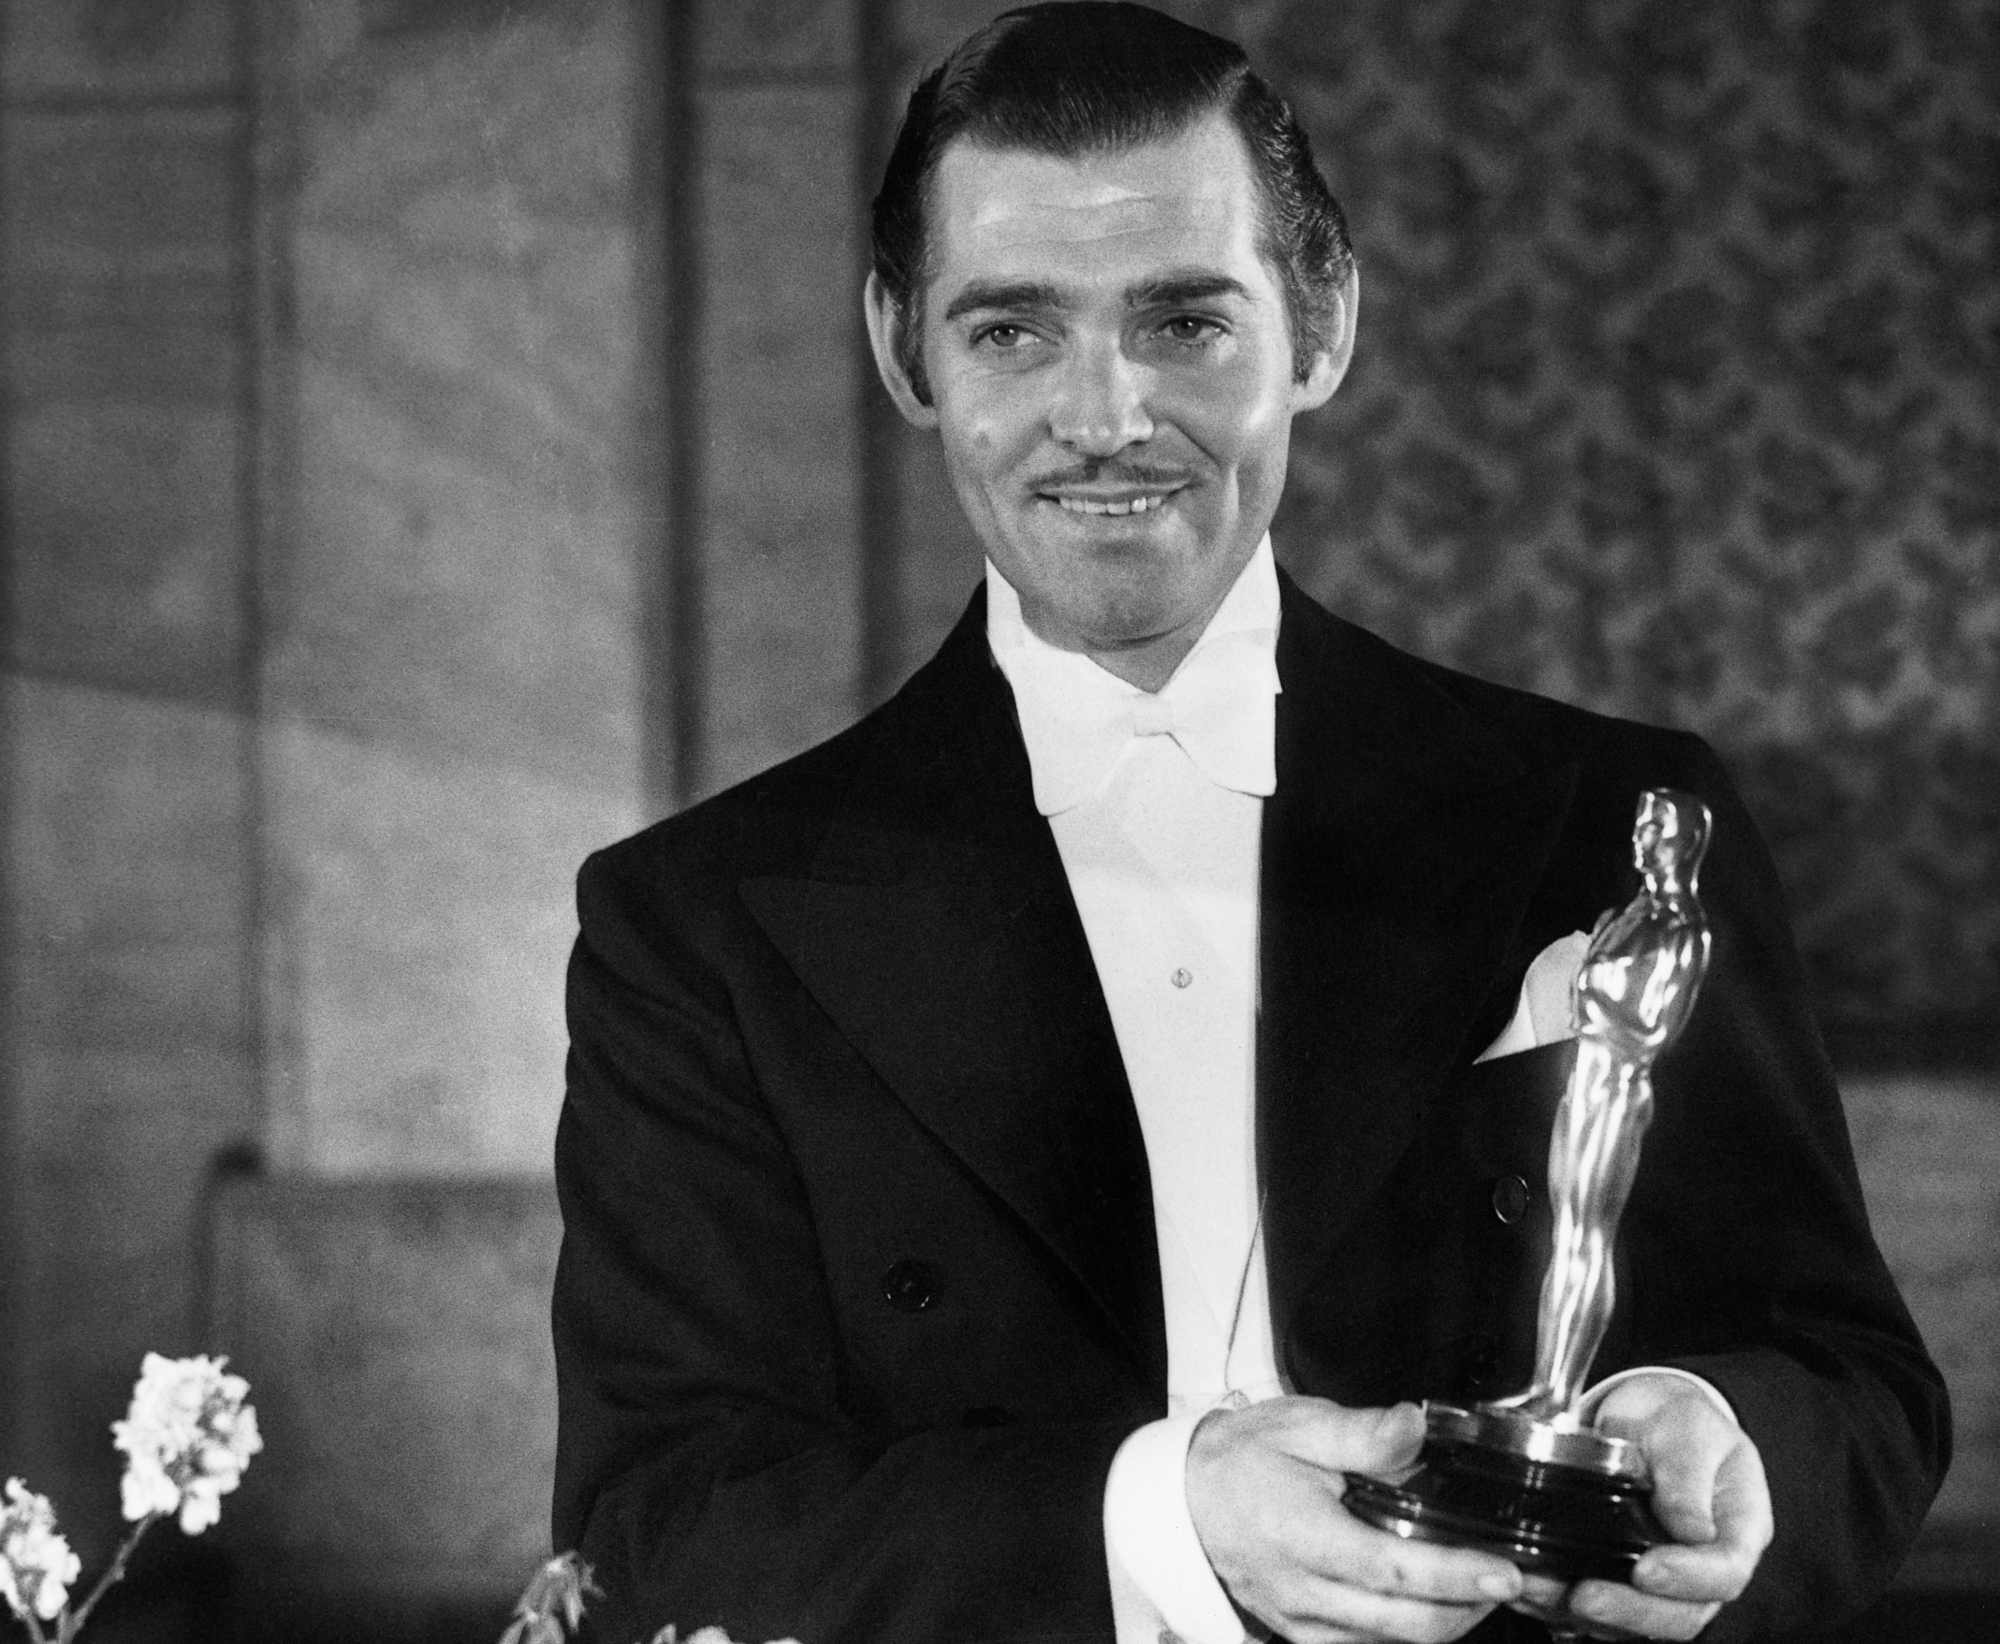 'It Happened One Night' Clark Gable holding an Oscar, smiling, while wearing a tux